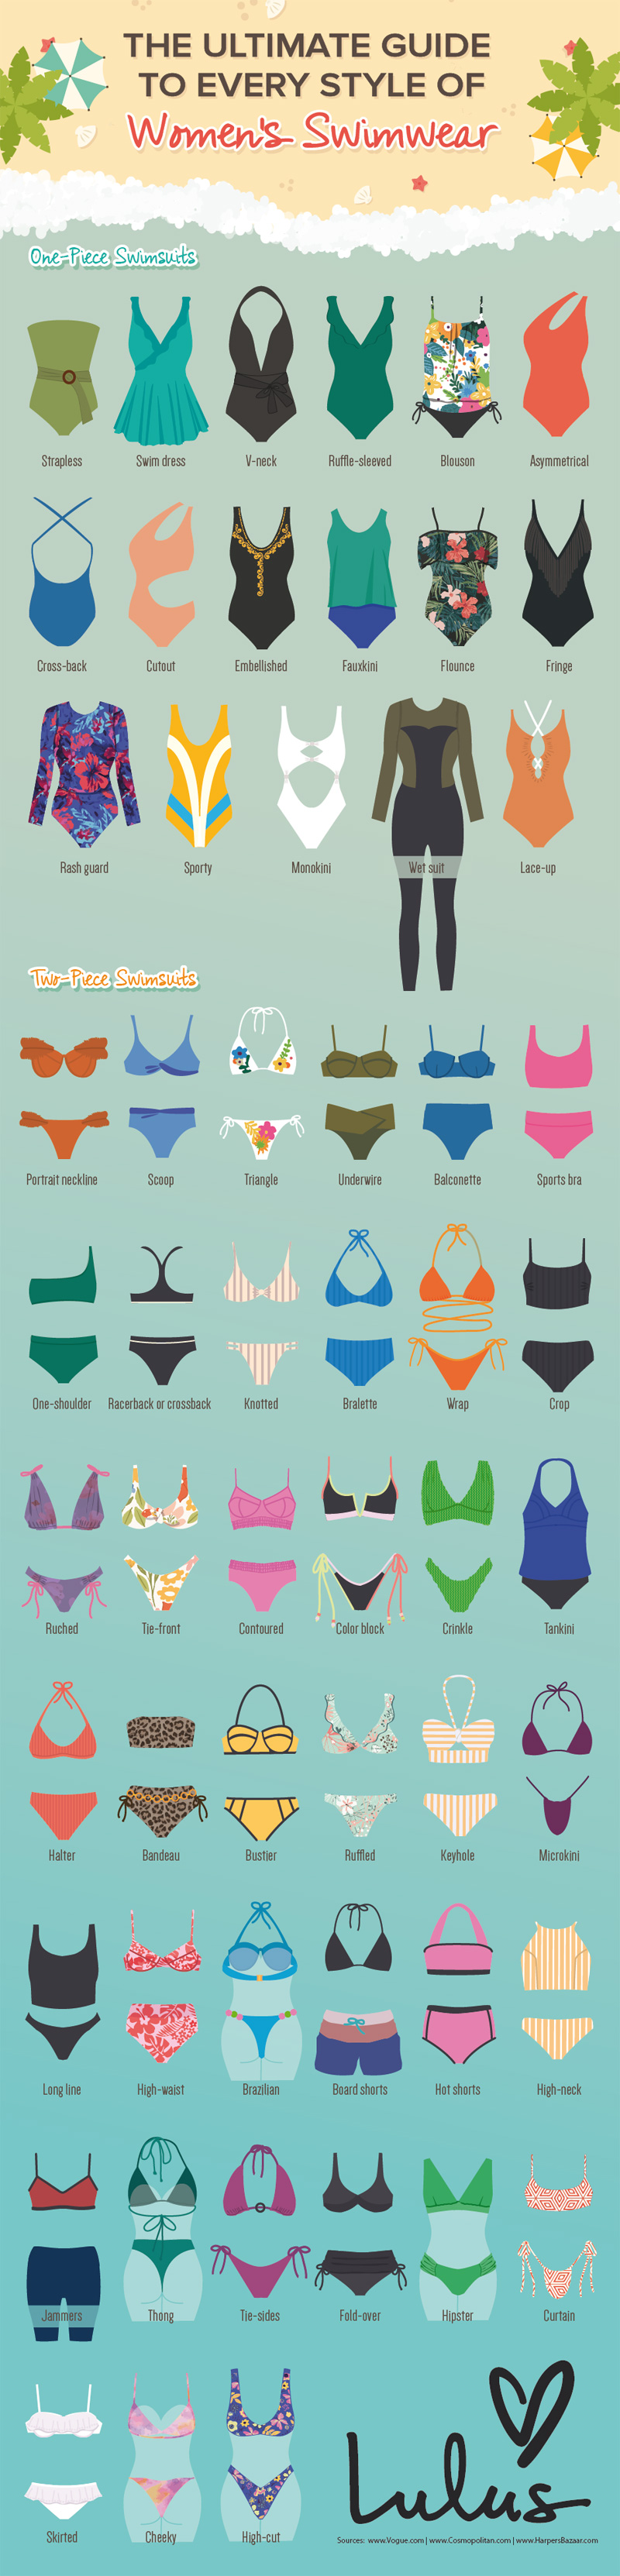 the untimate guide to every style of women's swimwear